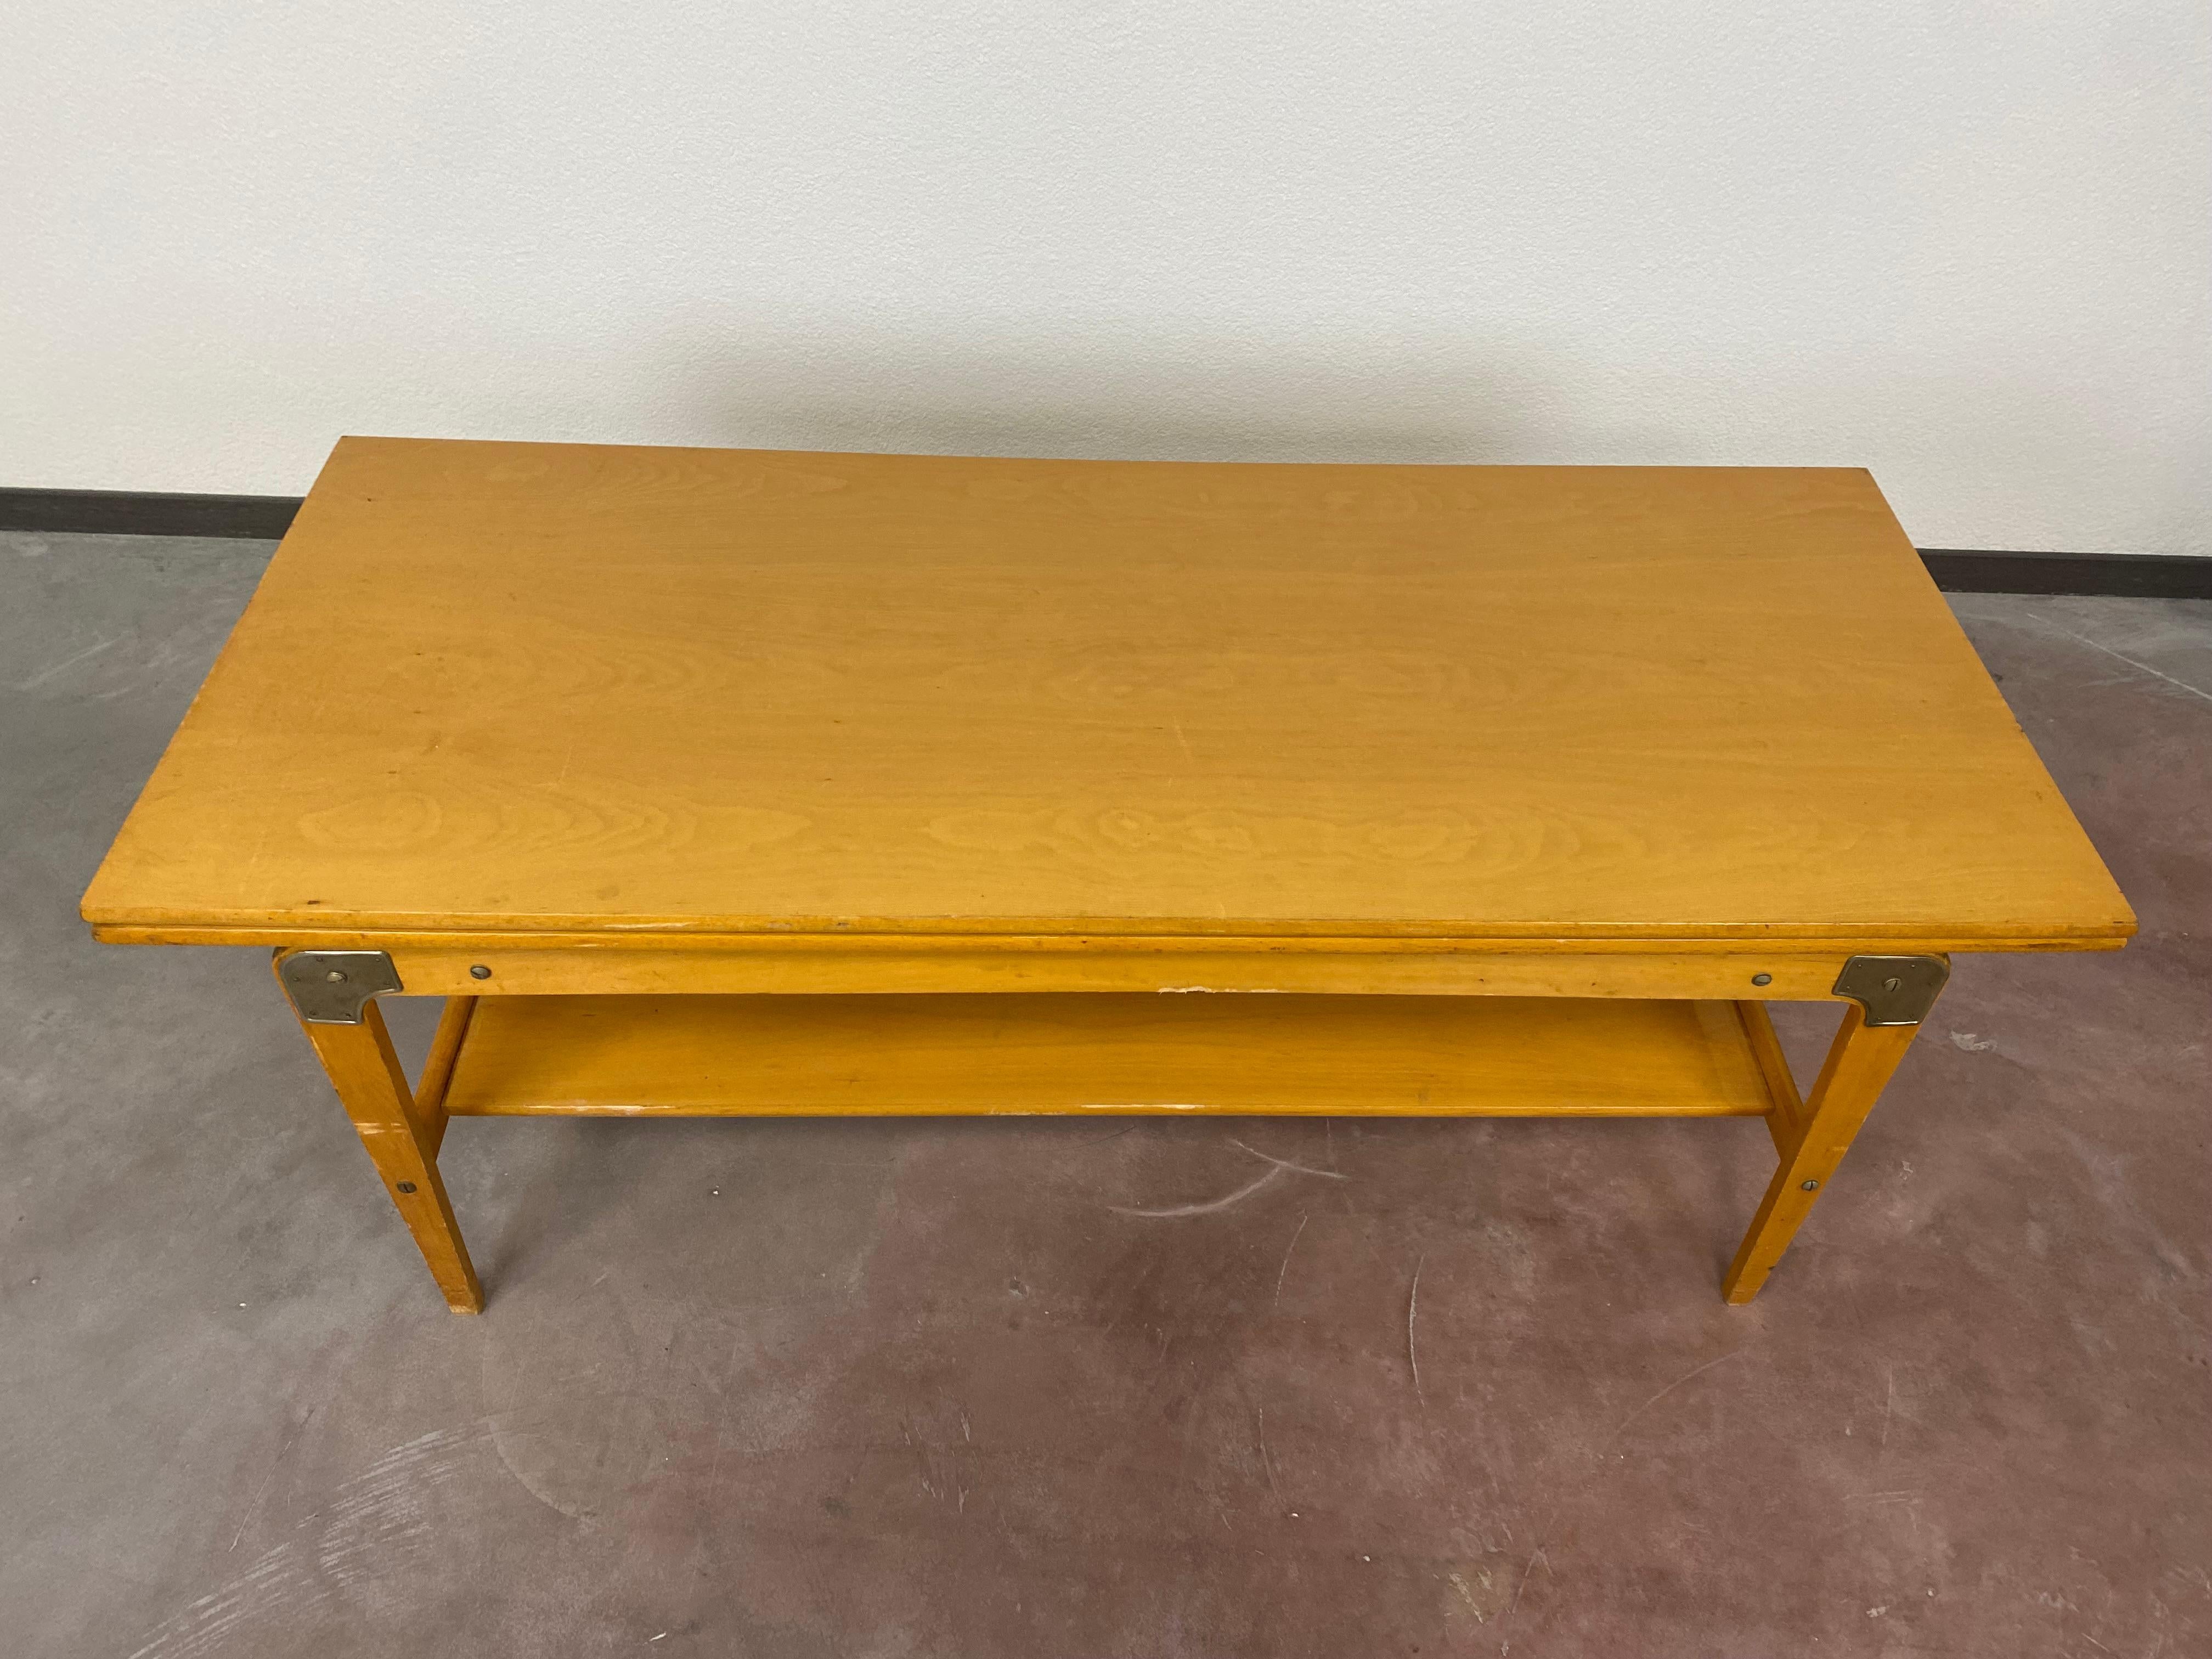 Vintage adjustable conference table. After spreading changes to dining table. Outspread dimensions 72x109x135. Original vintage condition with signs of usage.